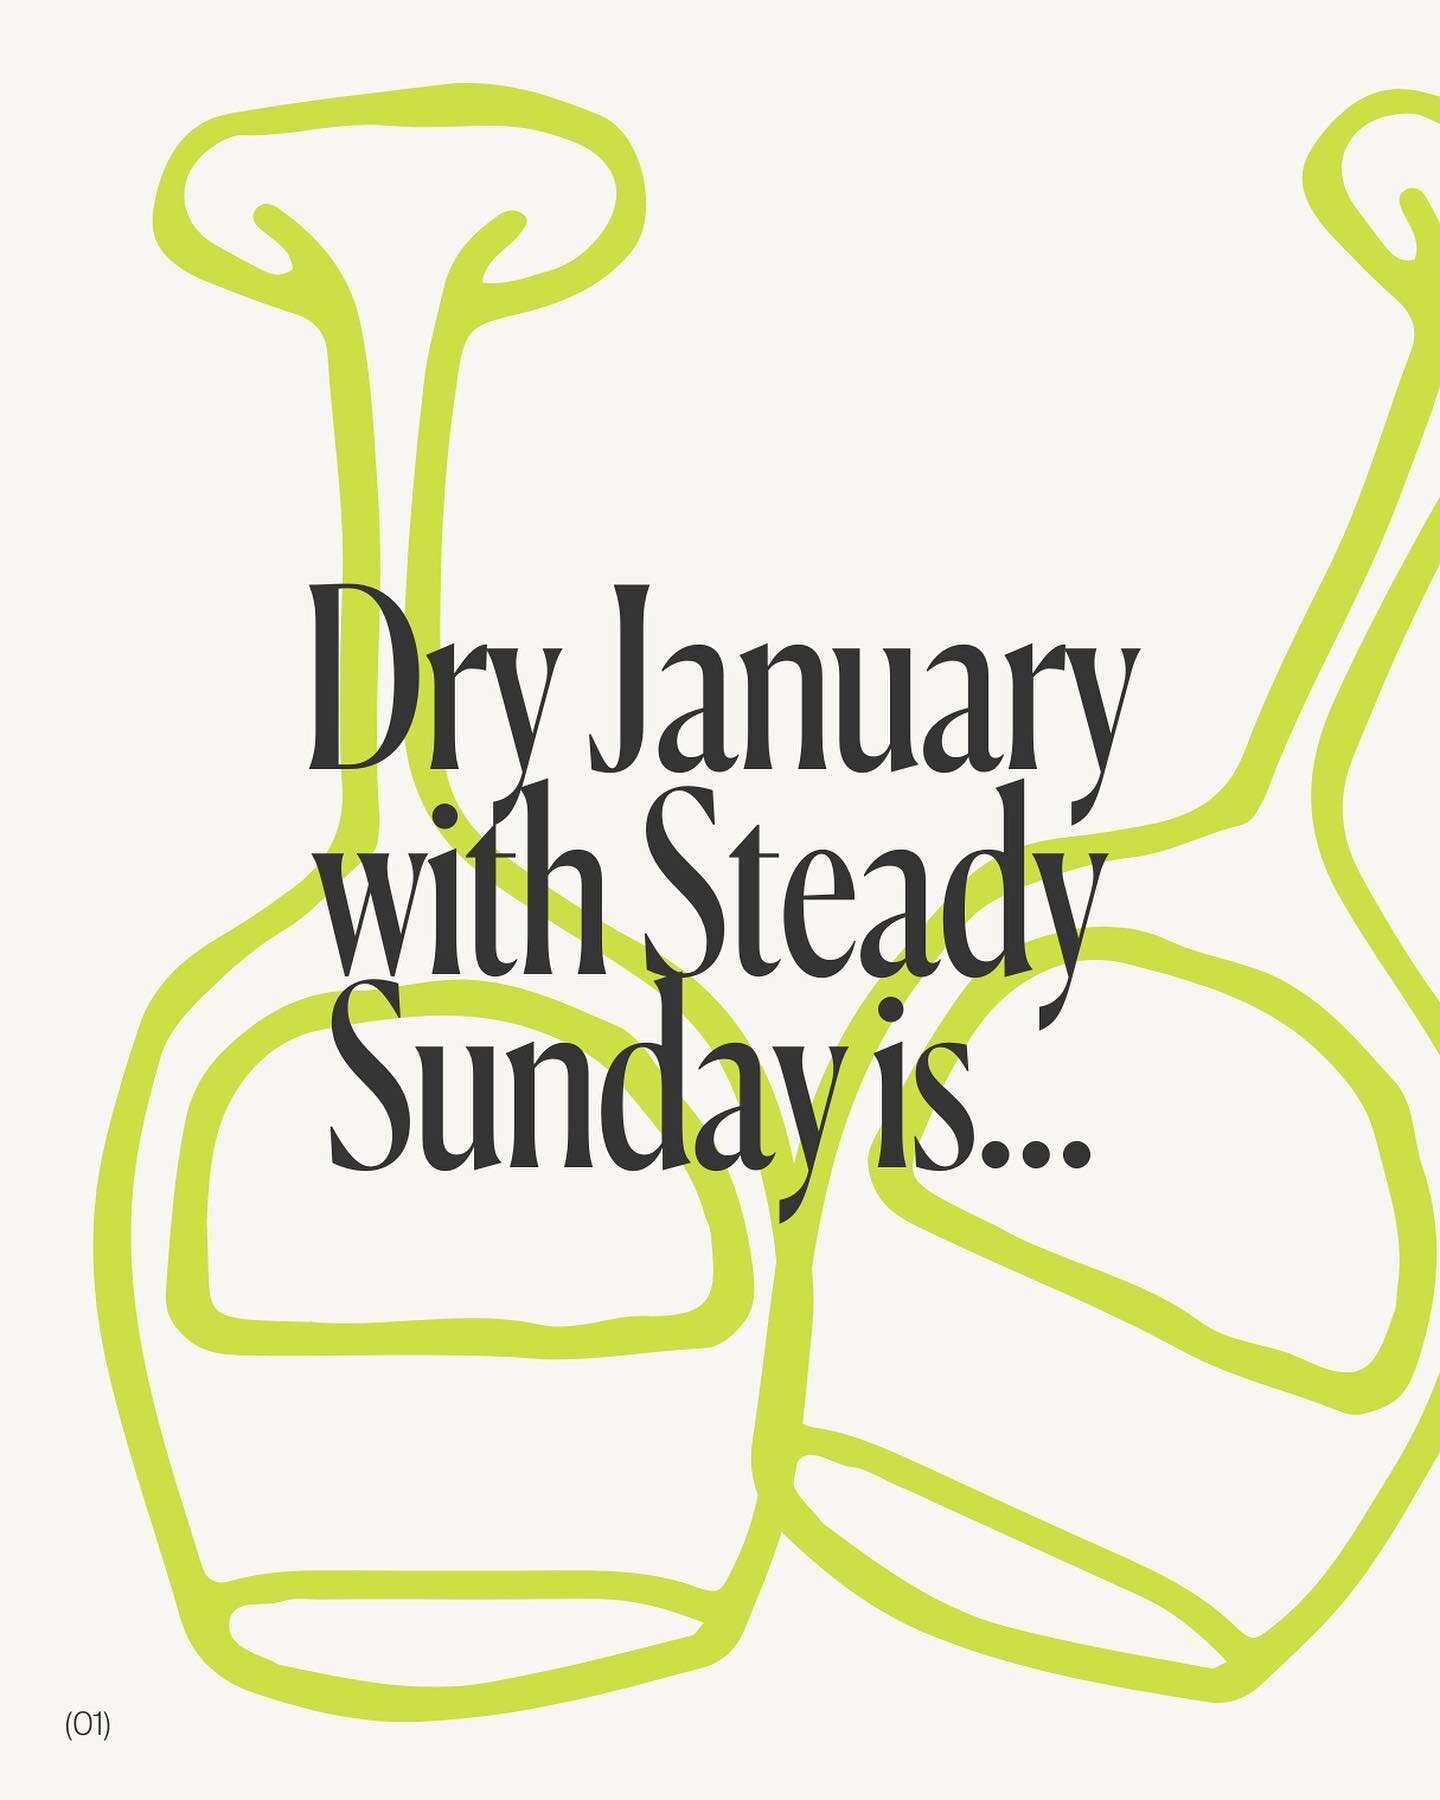 Tell a friend to tell a friend!! We can&rsquo;t wait to see ya. 
.
.
.

#dryjanuary #dryjan #steadysunday #alcoholfree #sobercurious #soberliving #sober